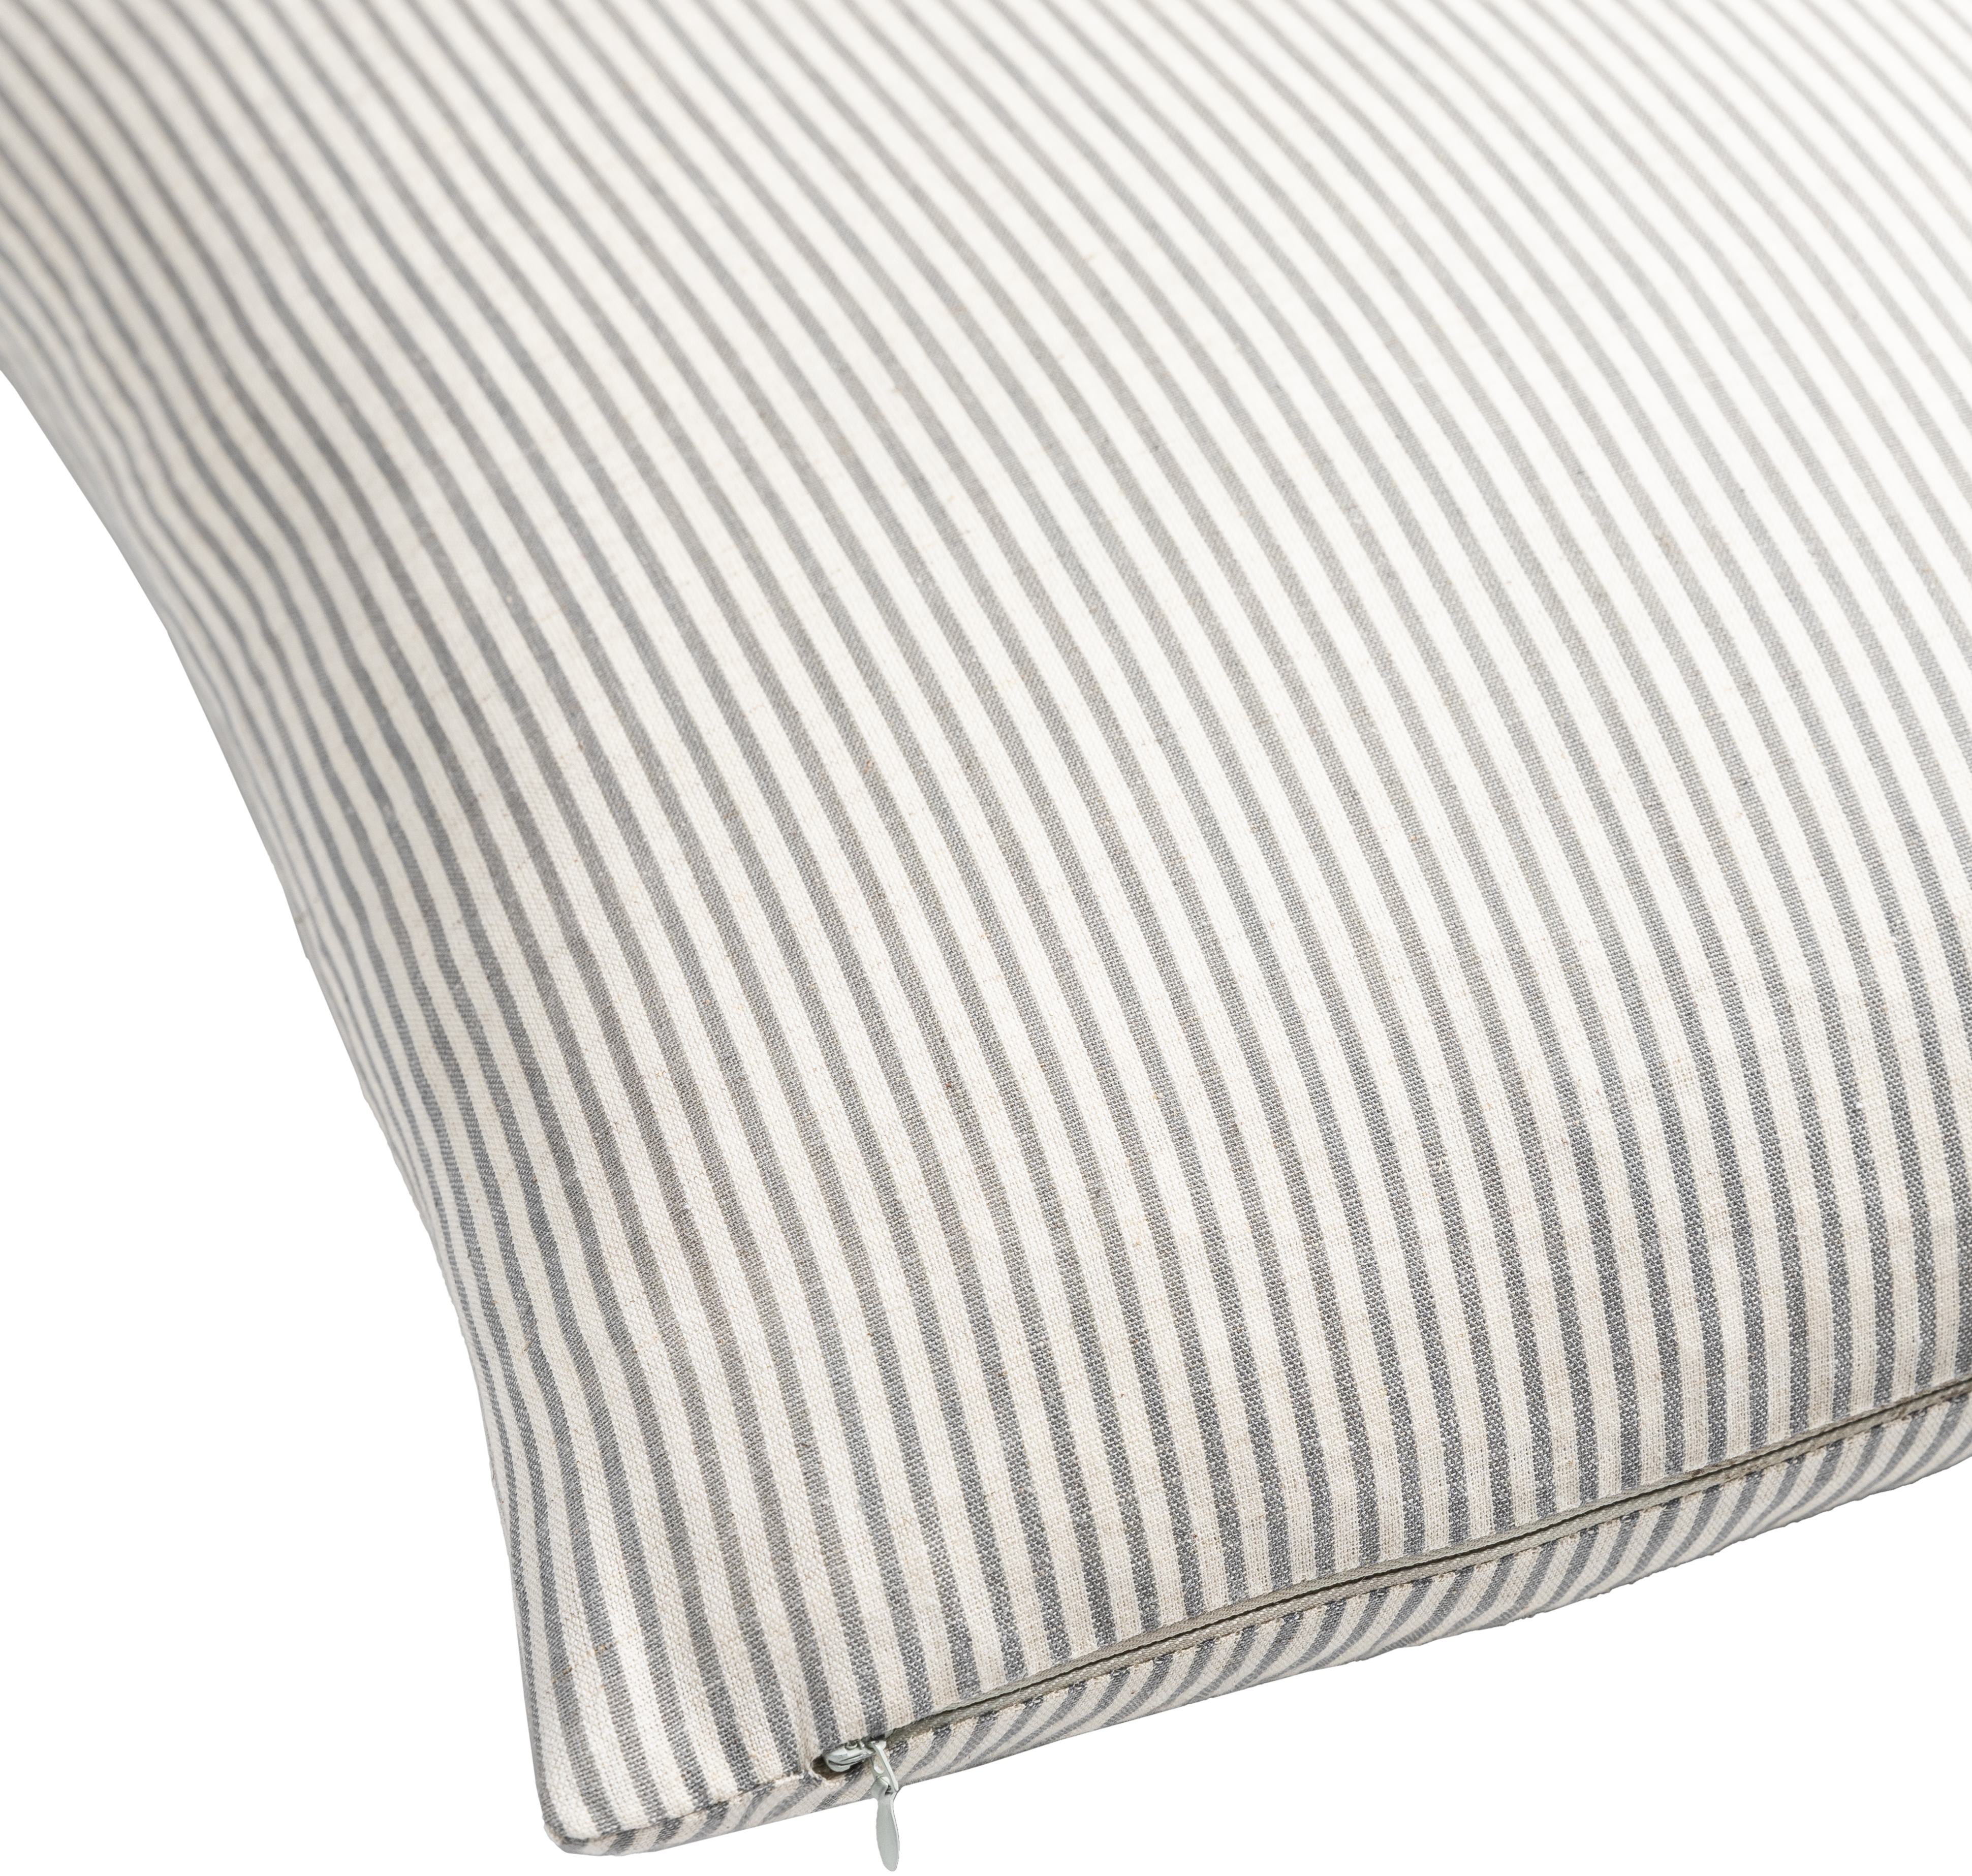 Skinny Stripe Throw Pillow, 18" x 18", pillow cover only - Image 1